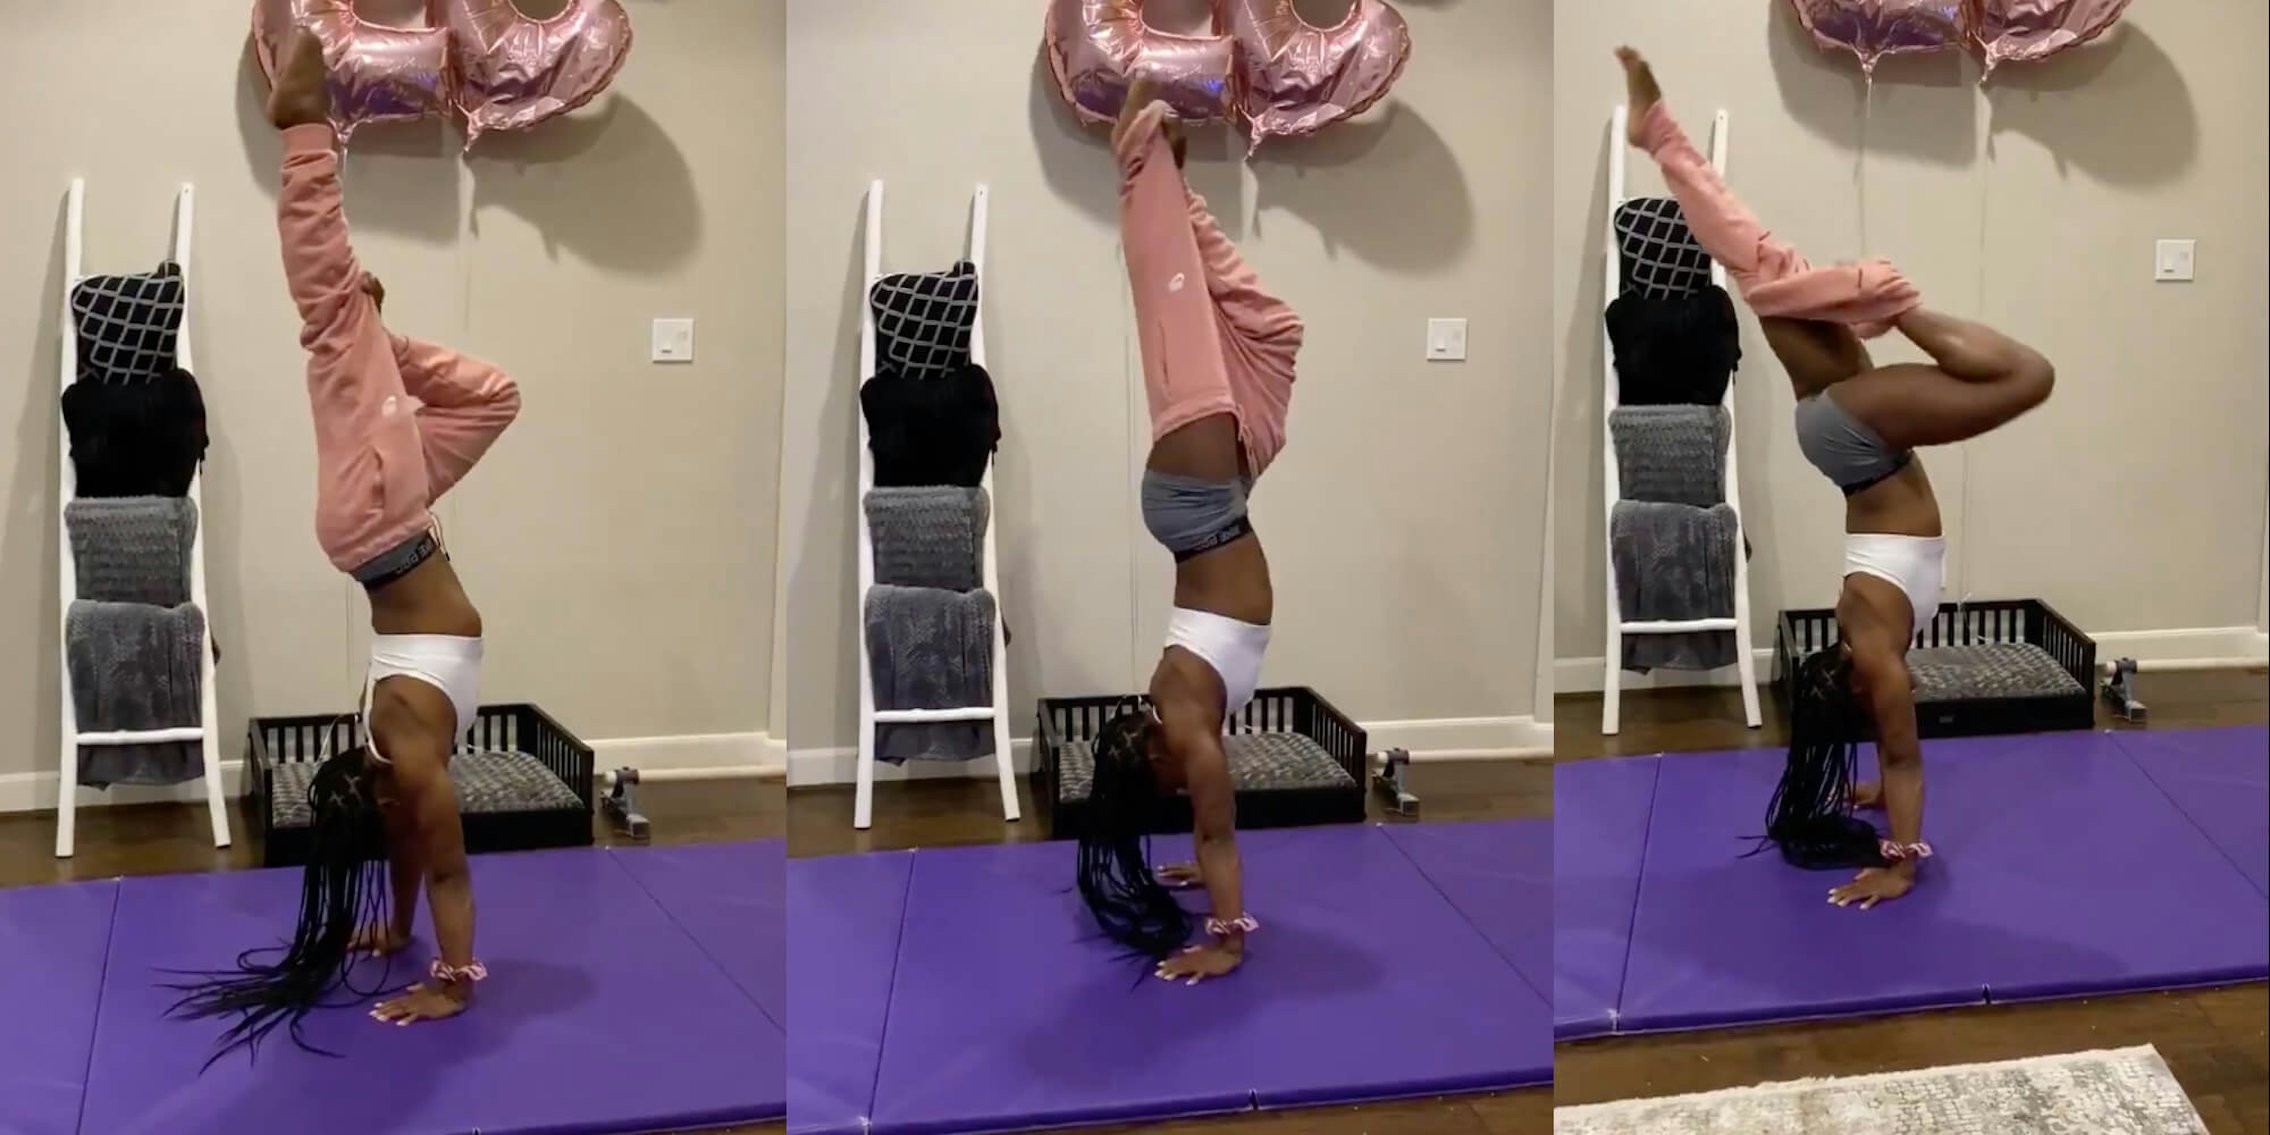 Simone Biles participating in the handstand challenge